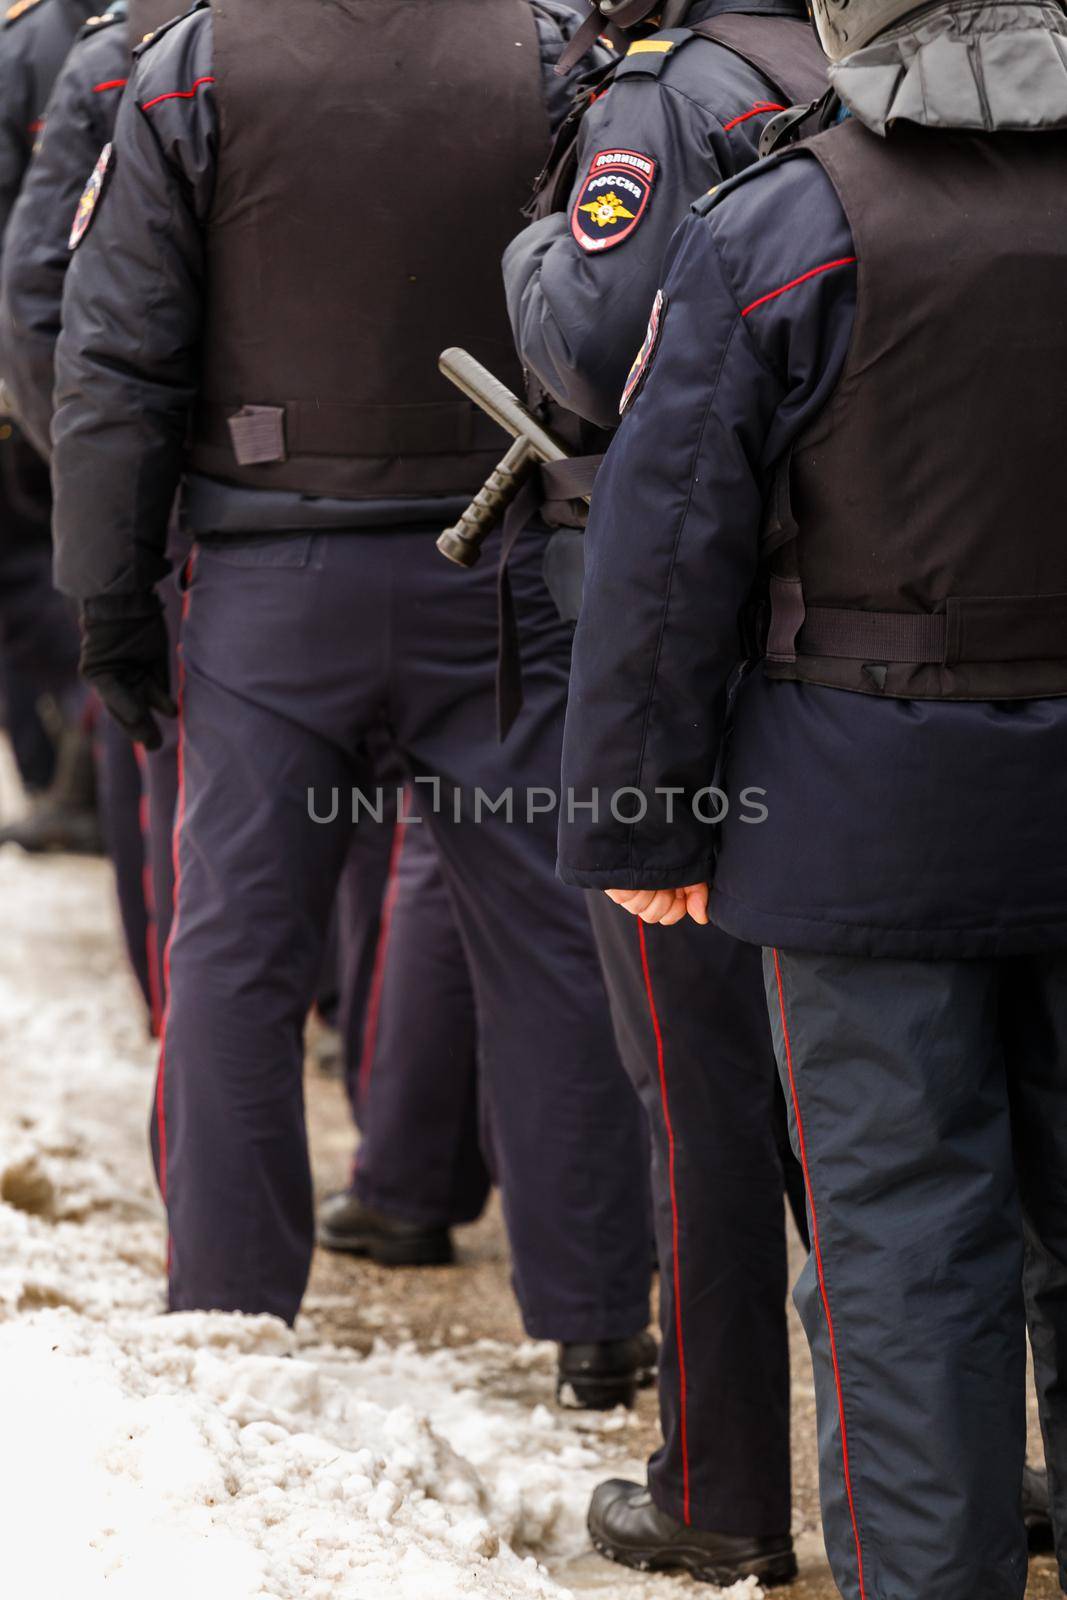 Tula, Russia - January 23, 2021: Crowd of police officers in black uniform with bulletproof vests and pistols - view from back. by z1b